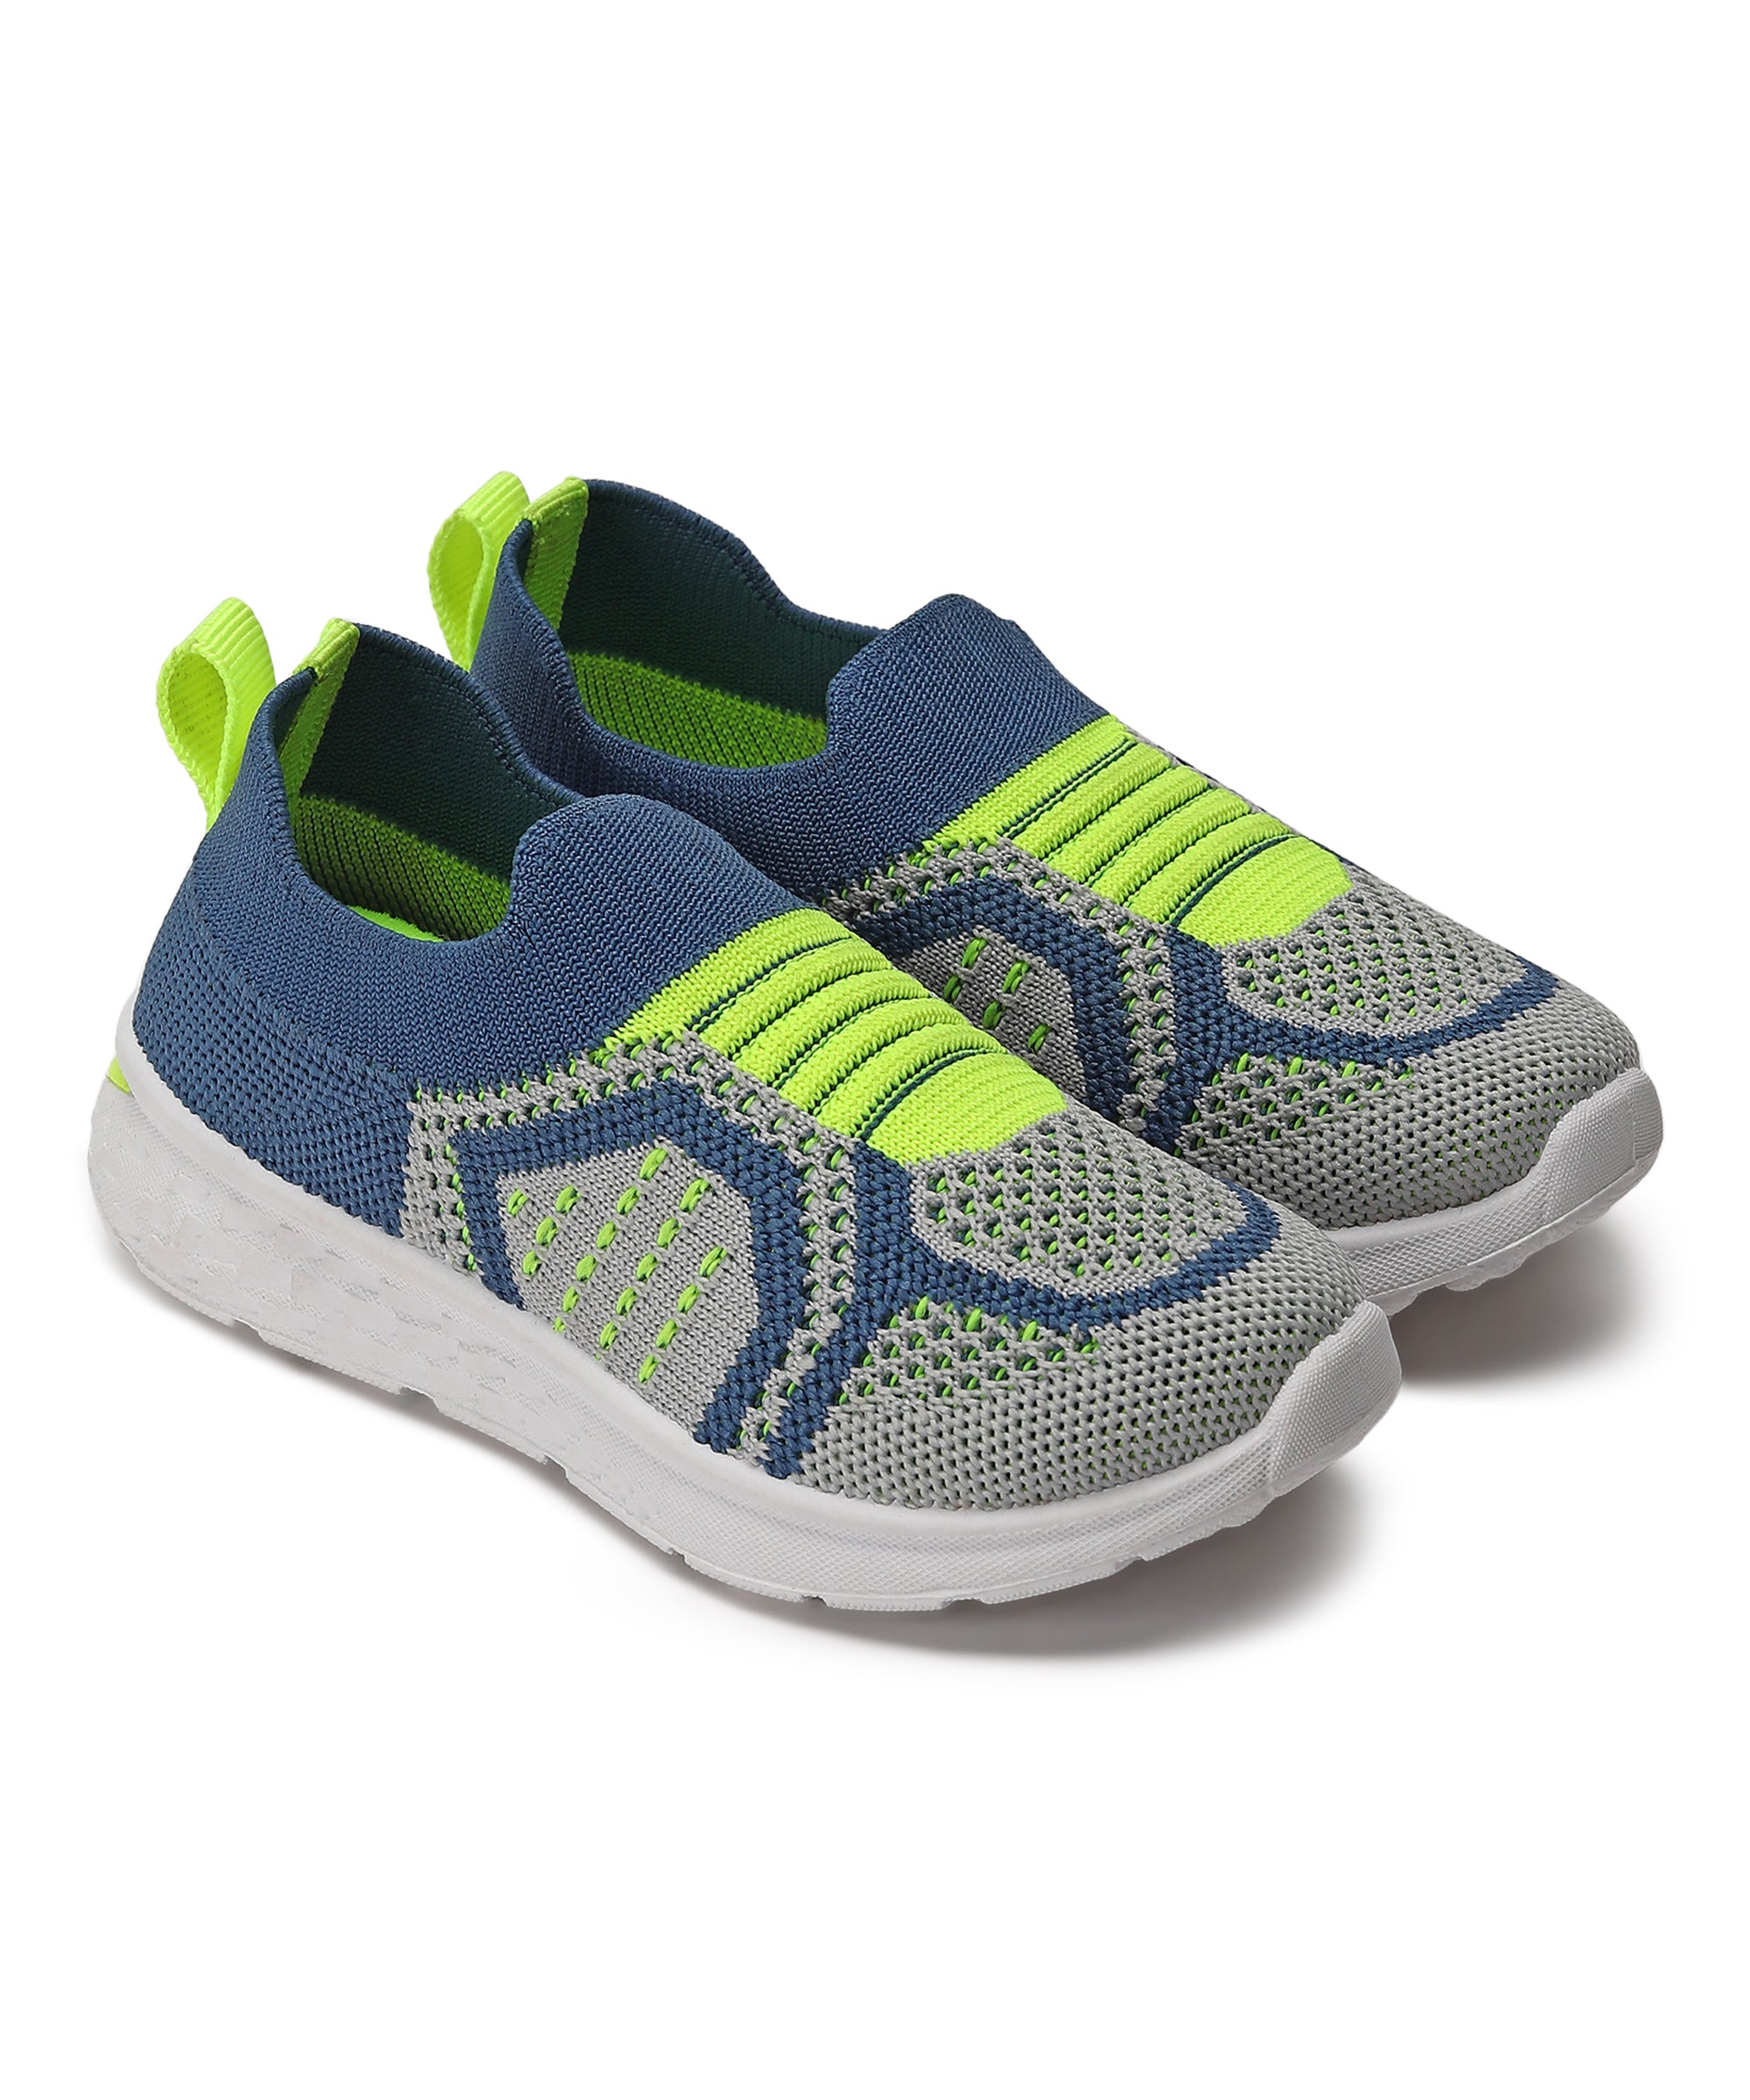 Paragon K8002C Kids Casual Fashion Shoes | Comfortable Trendy Shoes for Boys &amp; Girls